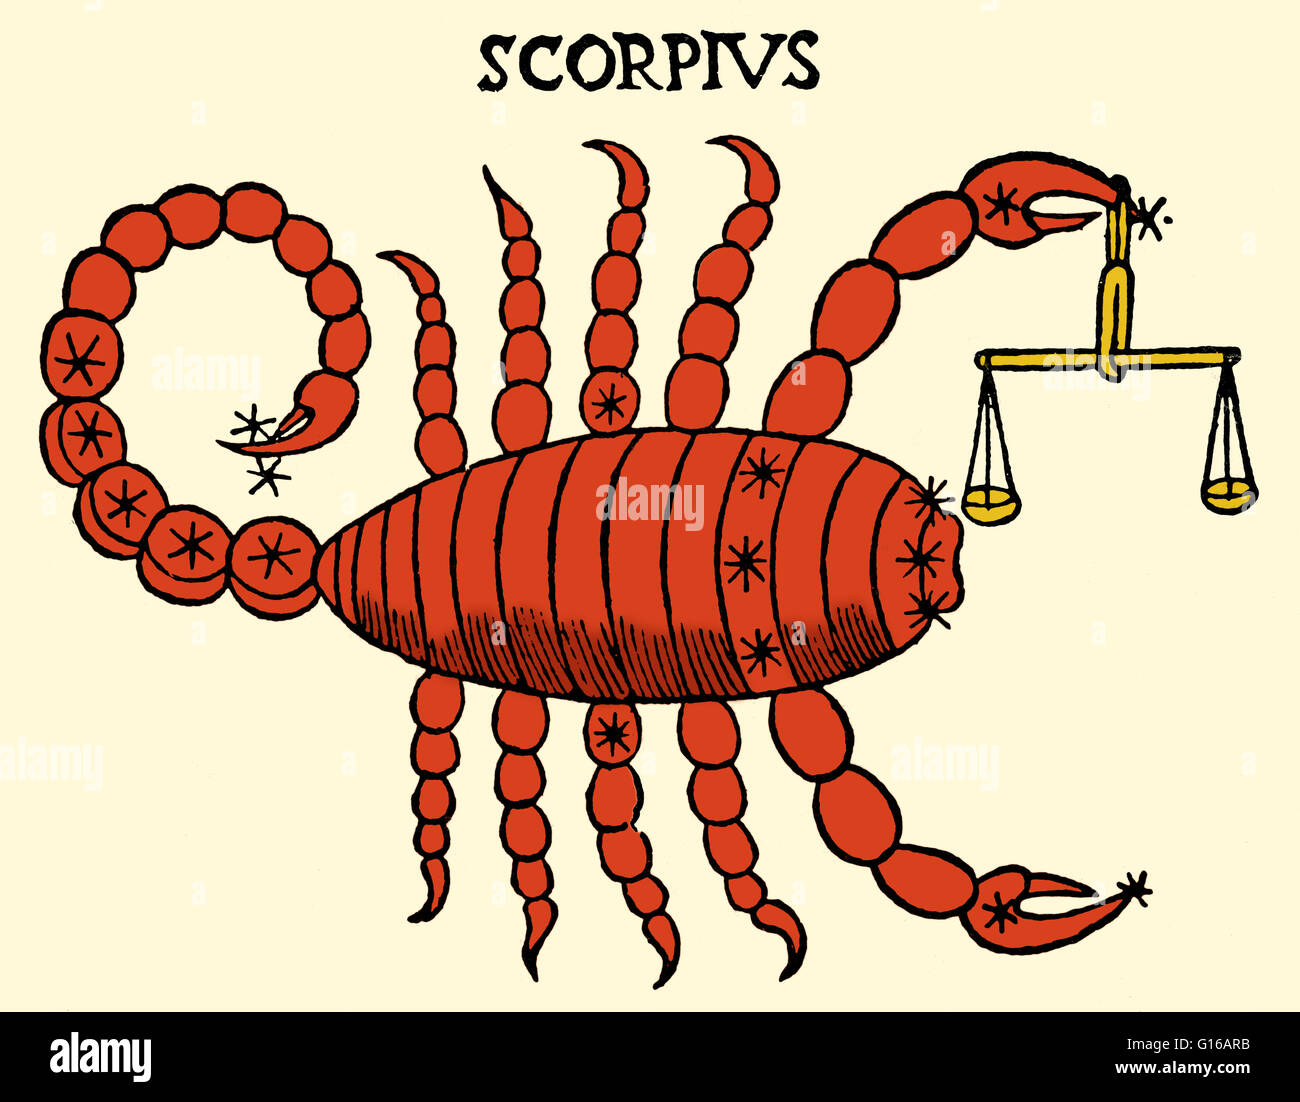 Historical illustration of Scorpius, or Scorpio, one of the constellations of the Zodiac. Stock Photo